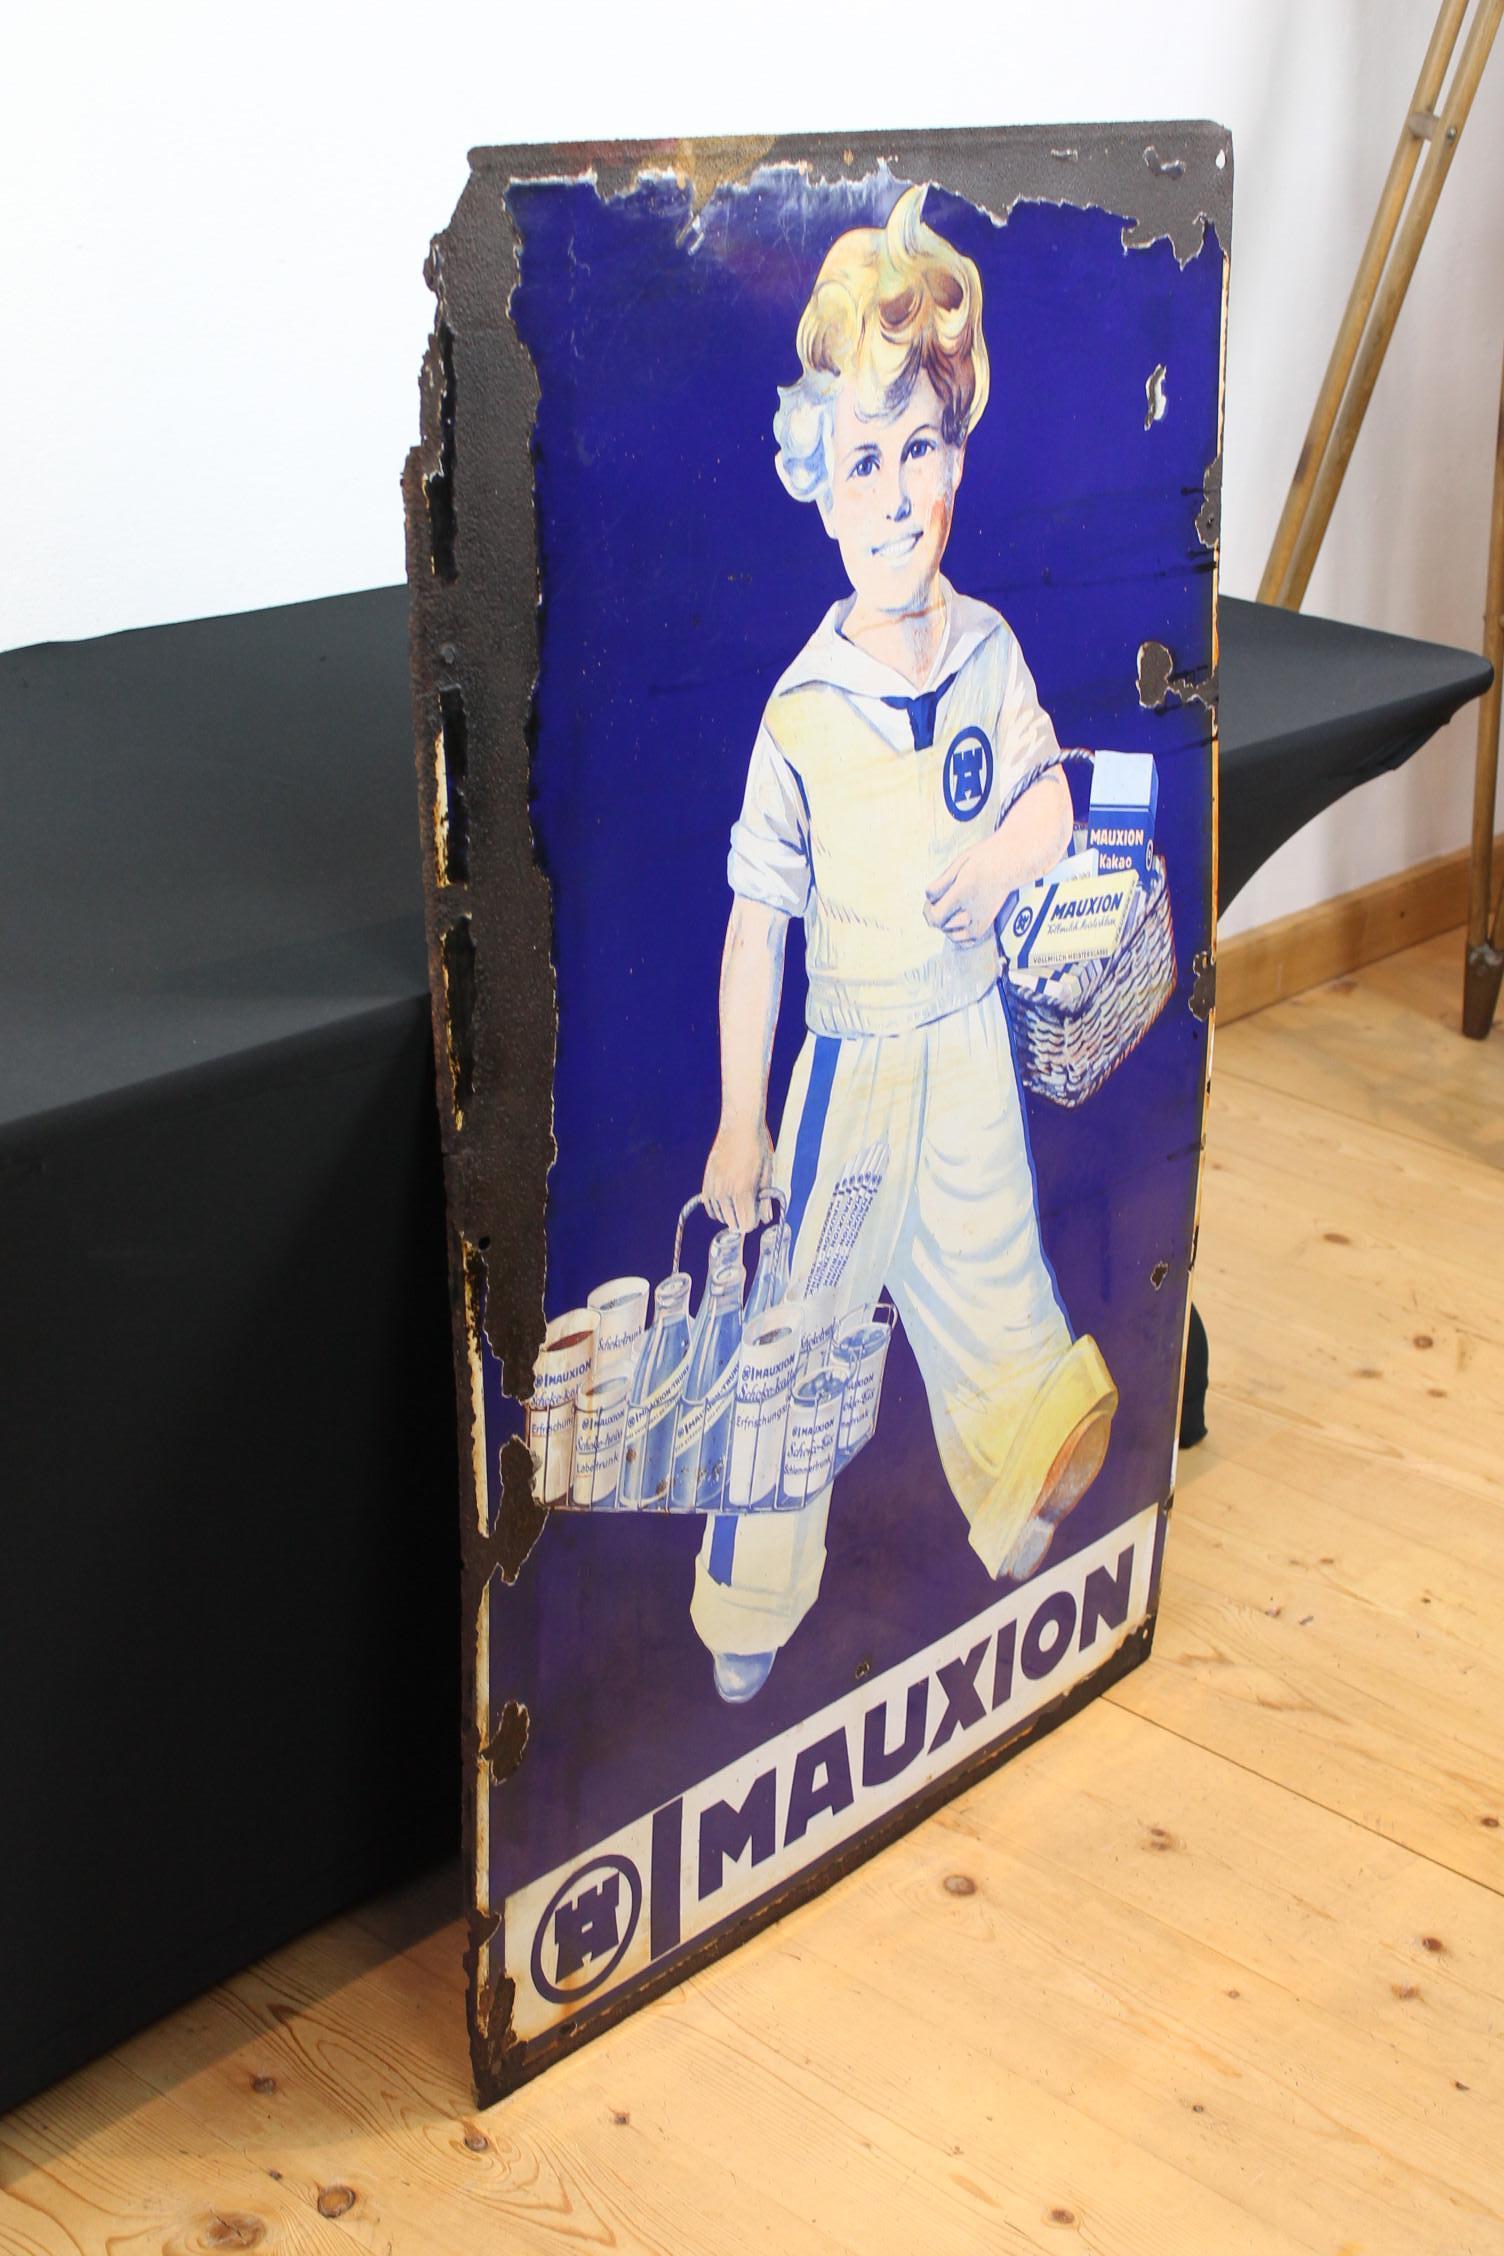 Large Porcelain Sign Mauxion Chocolat, 1920s, Germany  For Sale 4